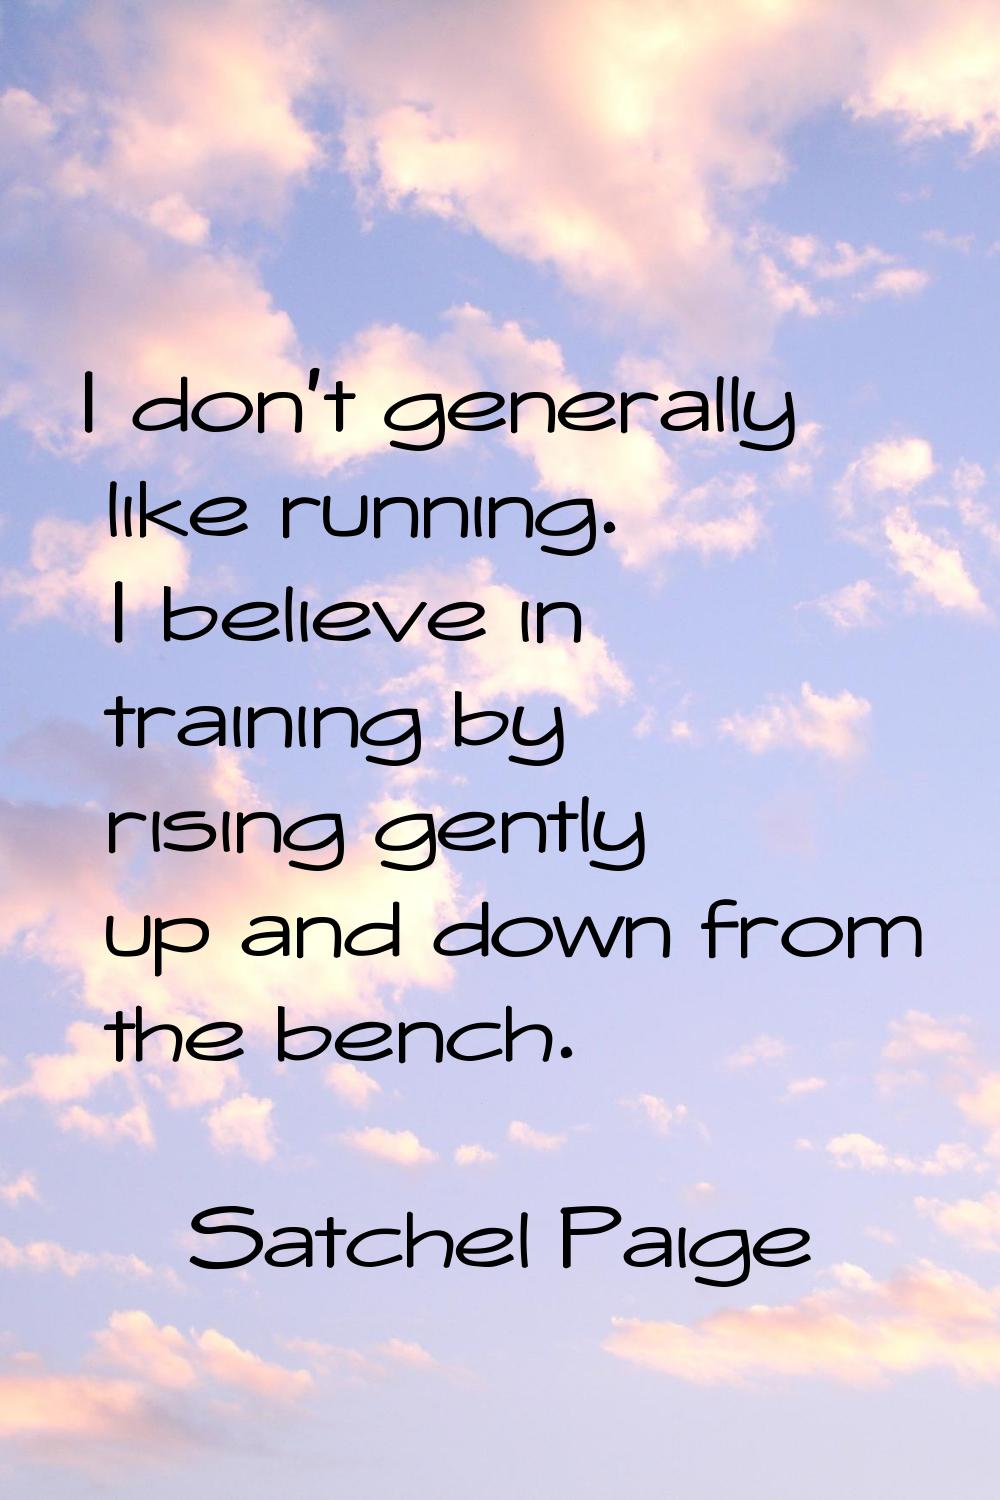 I don't generally like running. I believe in training by rising gently up and down from the bench.